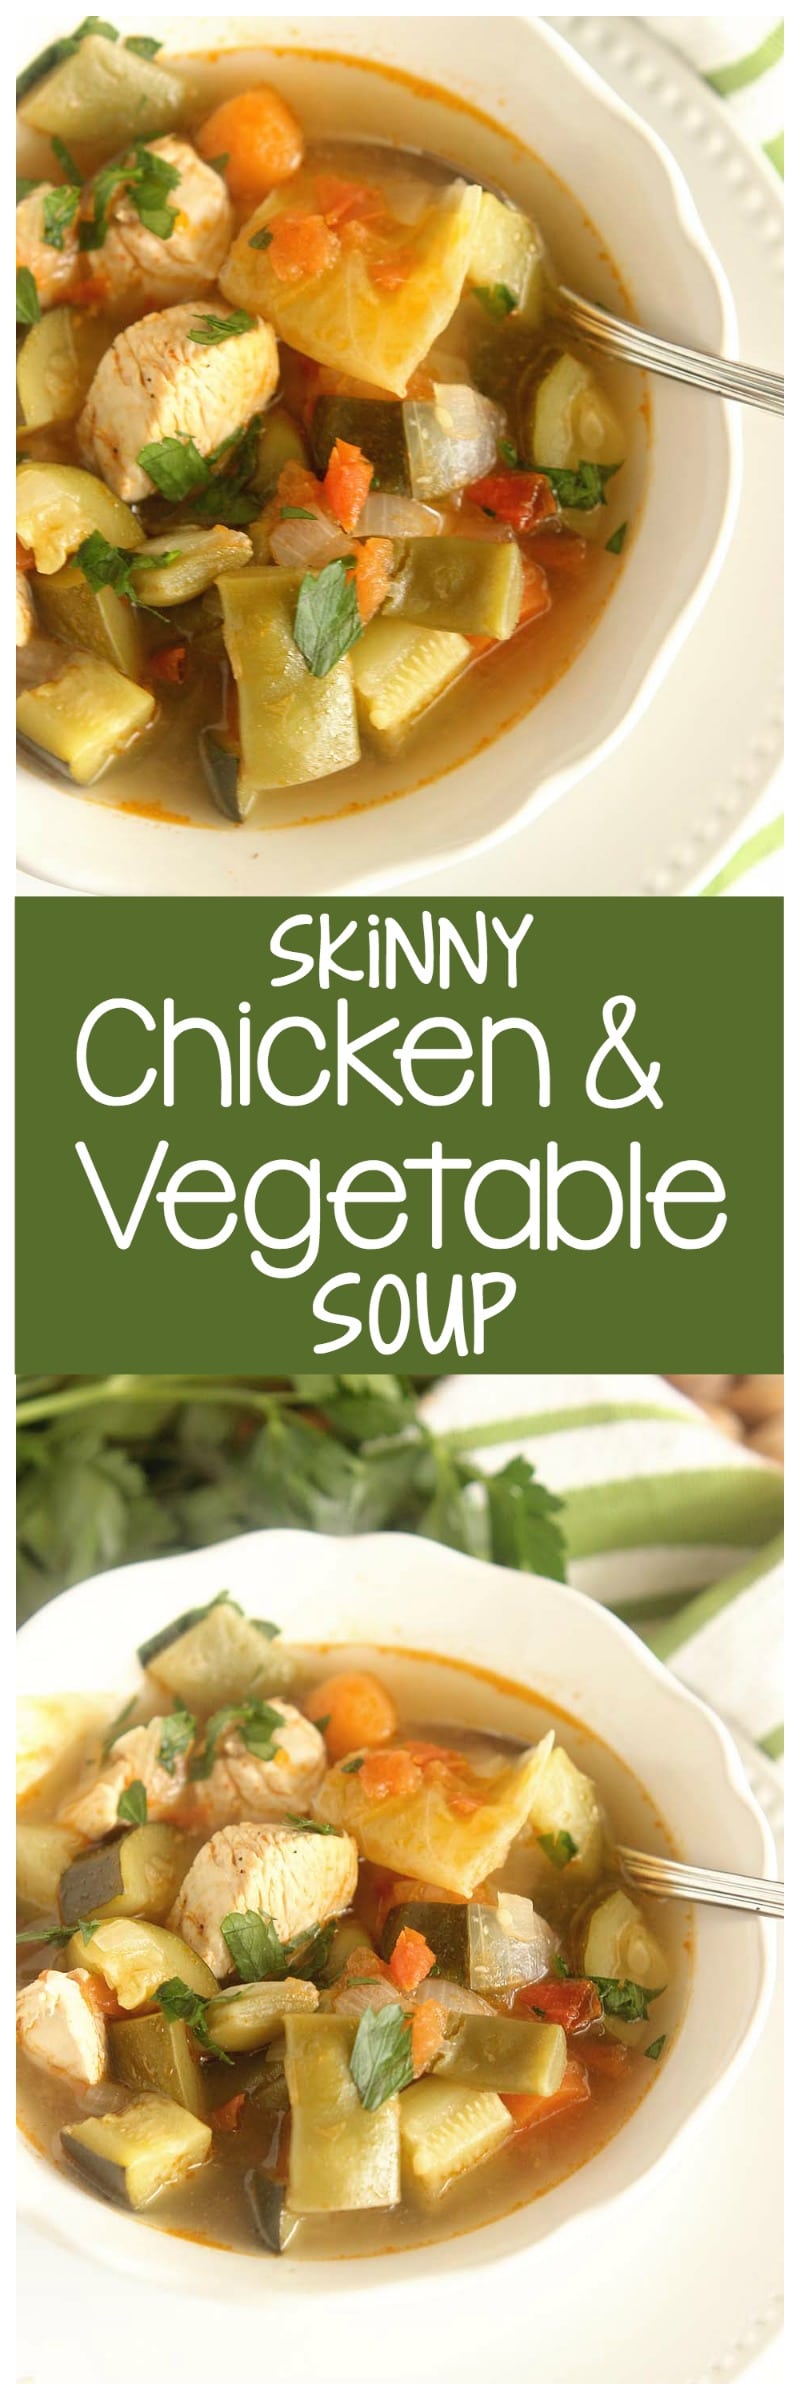 Skinny Chicken and Vegetable Soup - This healthy soup is filled with tons of great vegetables and chicken in a light broth. It will leaving you feeling full and guilt-free!!  Plus, it's only 1 freestyle weight watchers point!!